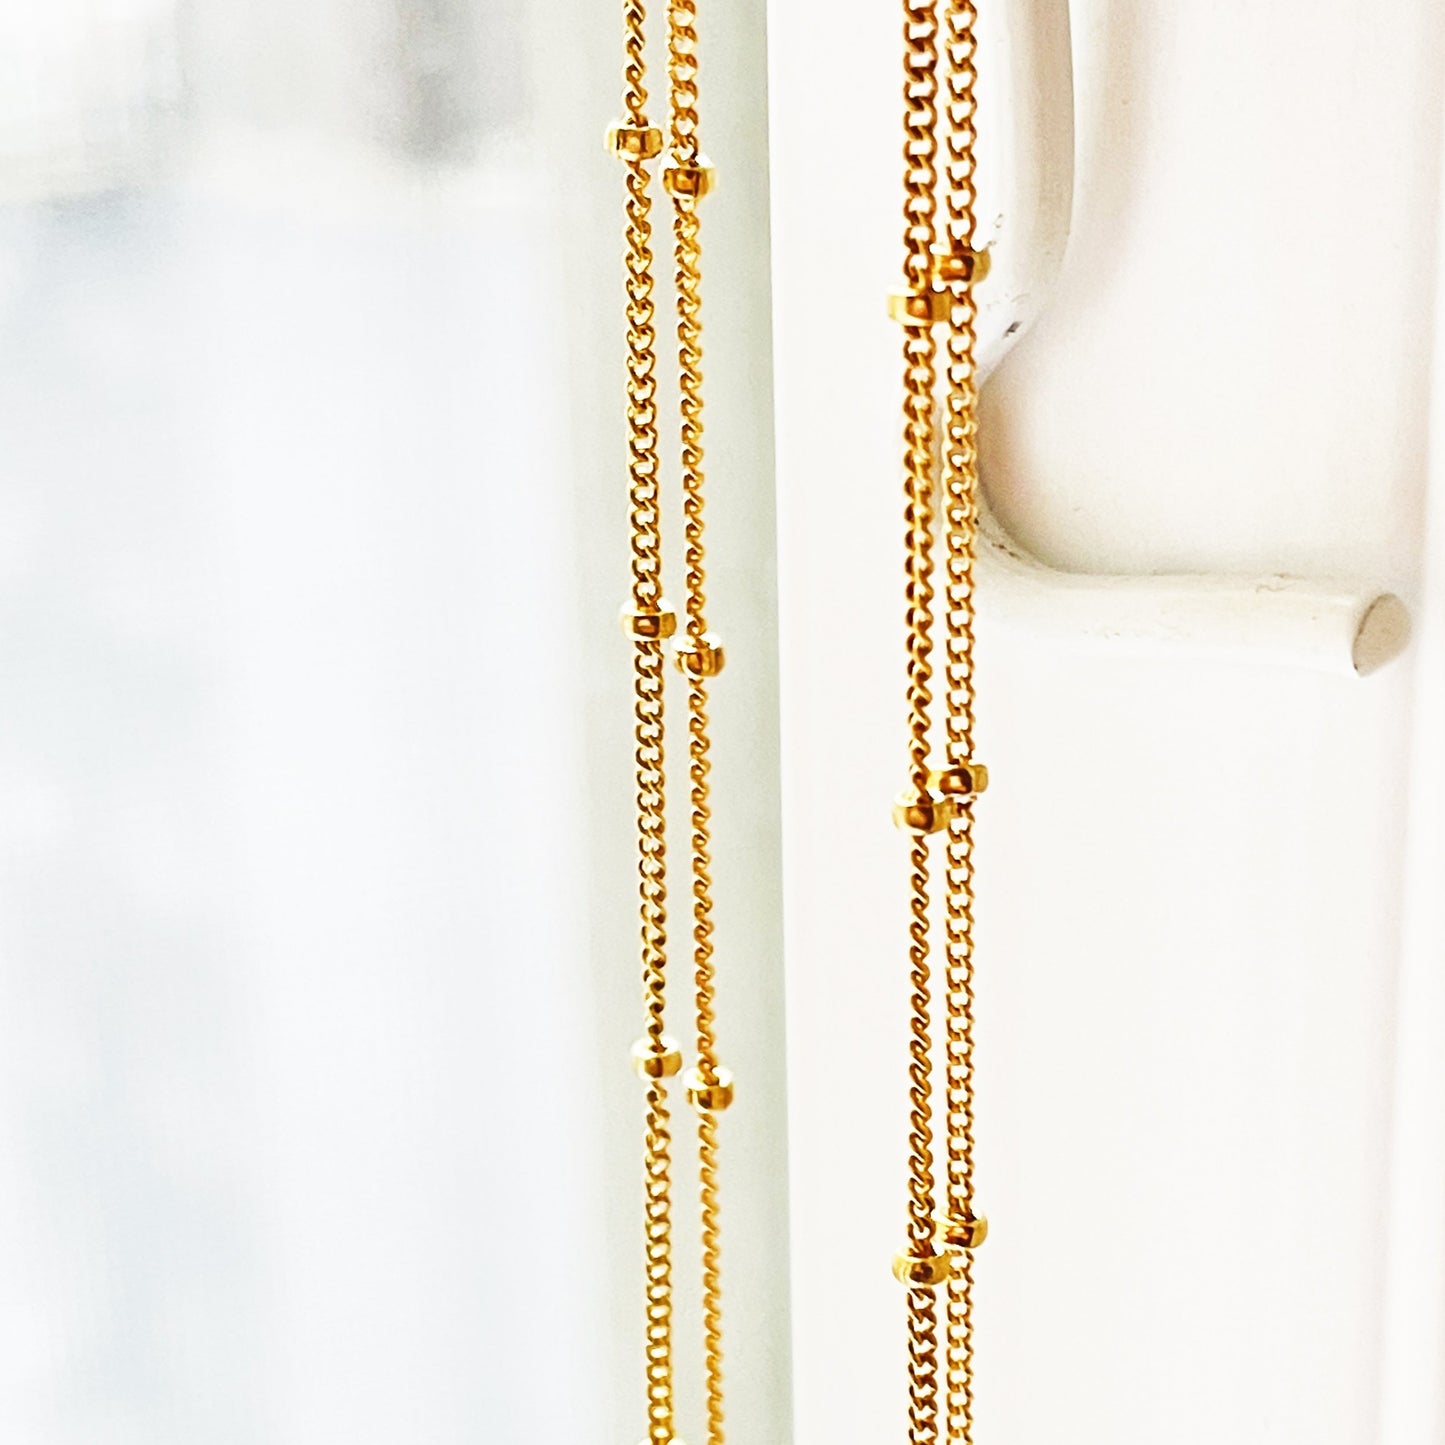 Two 14" sections of Gold-Filled Satellite Chain